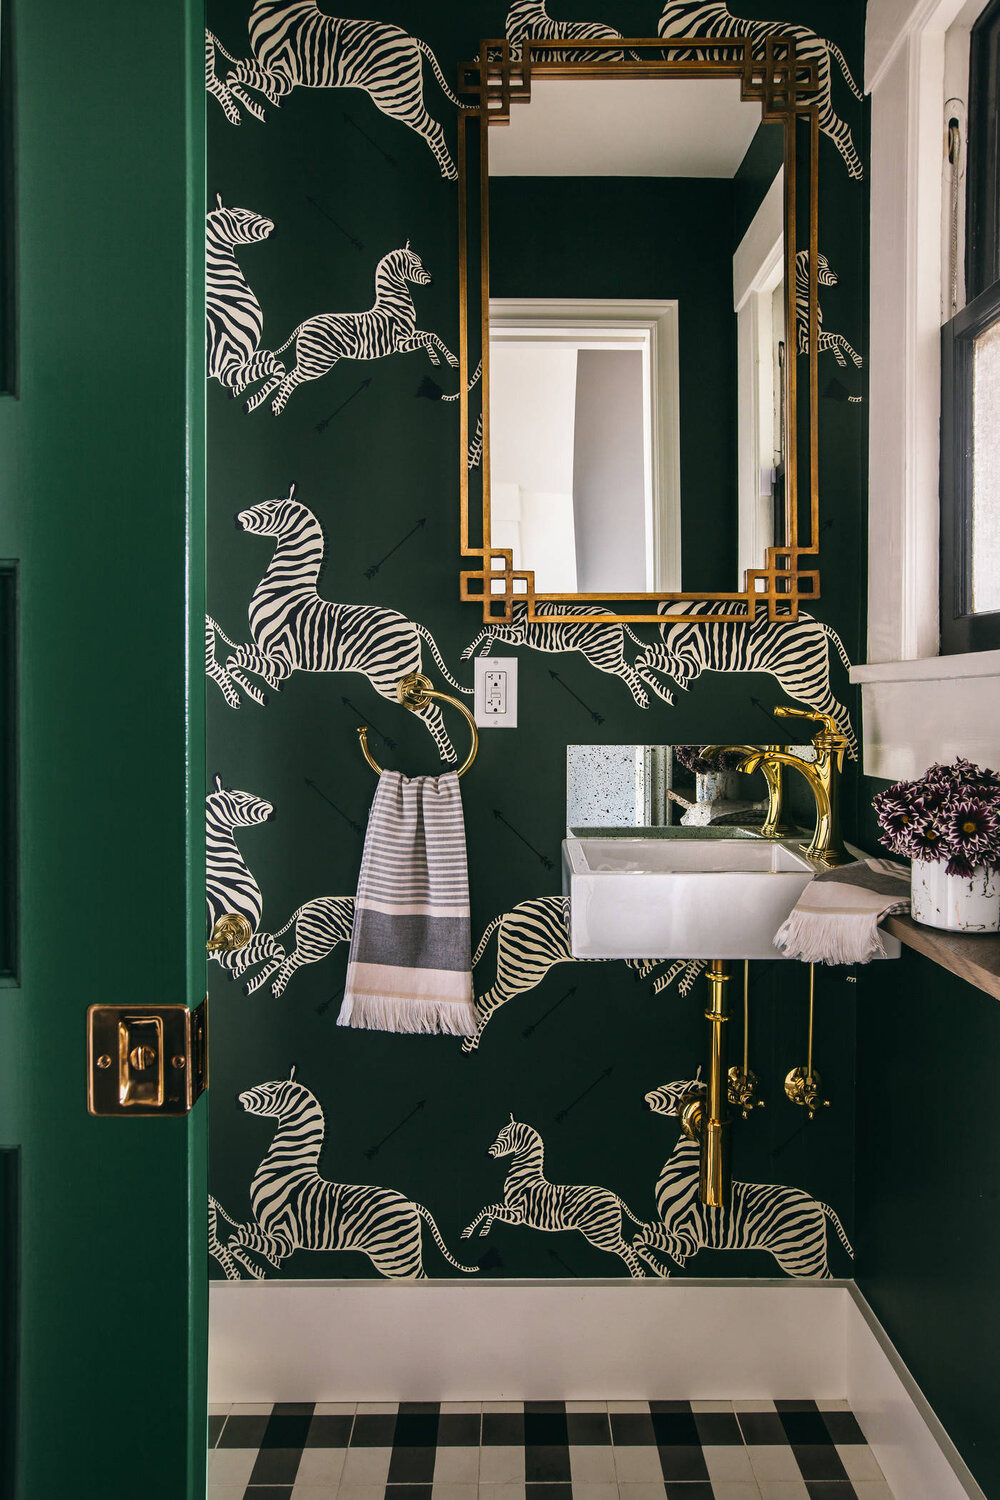 Low On Space But High On Style 20 Super Tiny Powder Rooms With Incredible Design Dlghtd